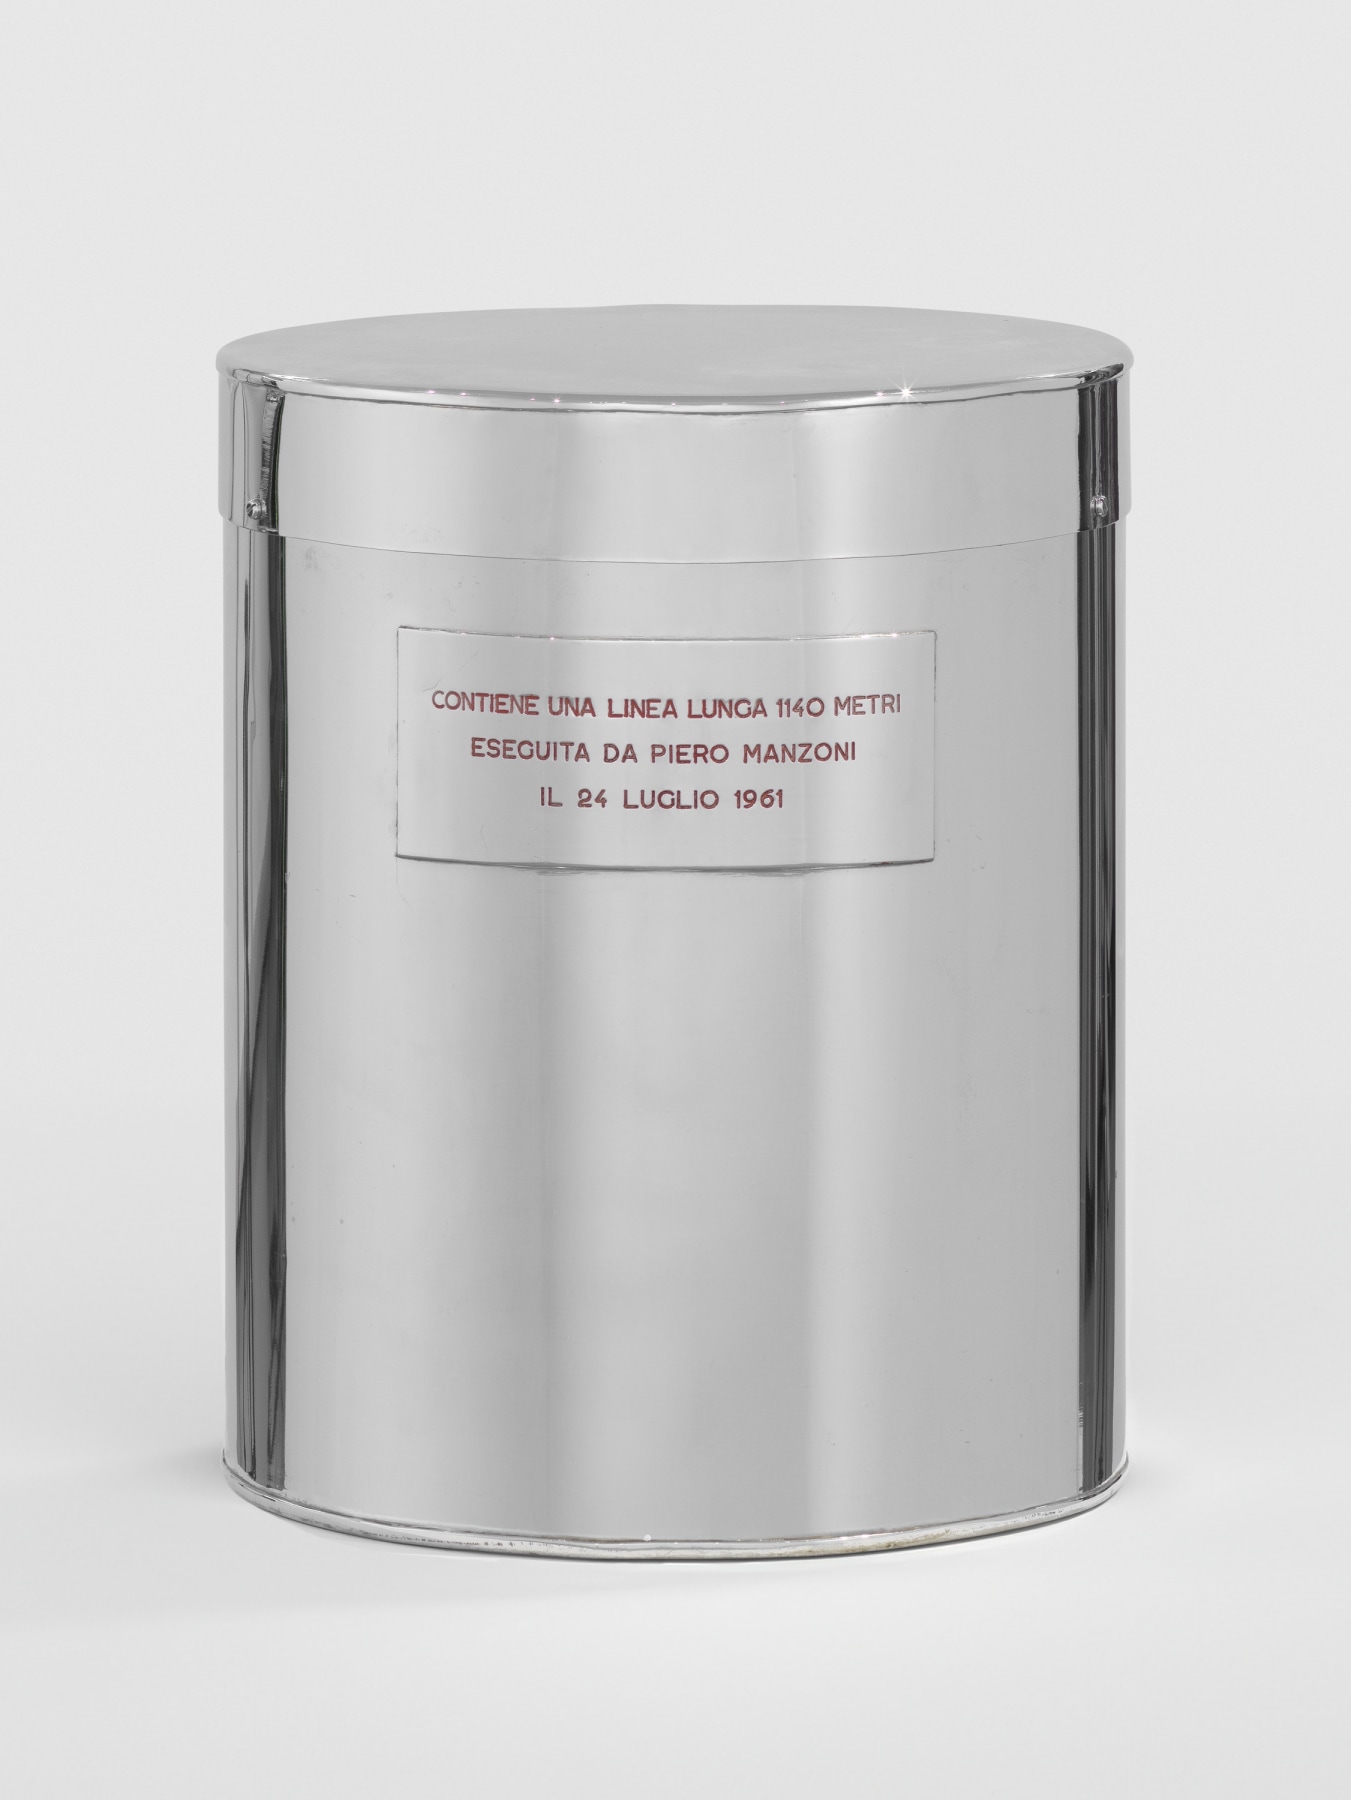 Piero Manzoni

&amp;ldquo;Linea m. 1140&amp;rdquo;, 1961

Ink on paper in chrome canister

20 1/2 x 16 1/2 x 16 1/2 inches

52 x 42 x 42 cm

MAN 41